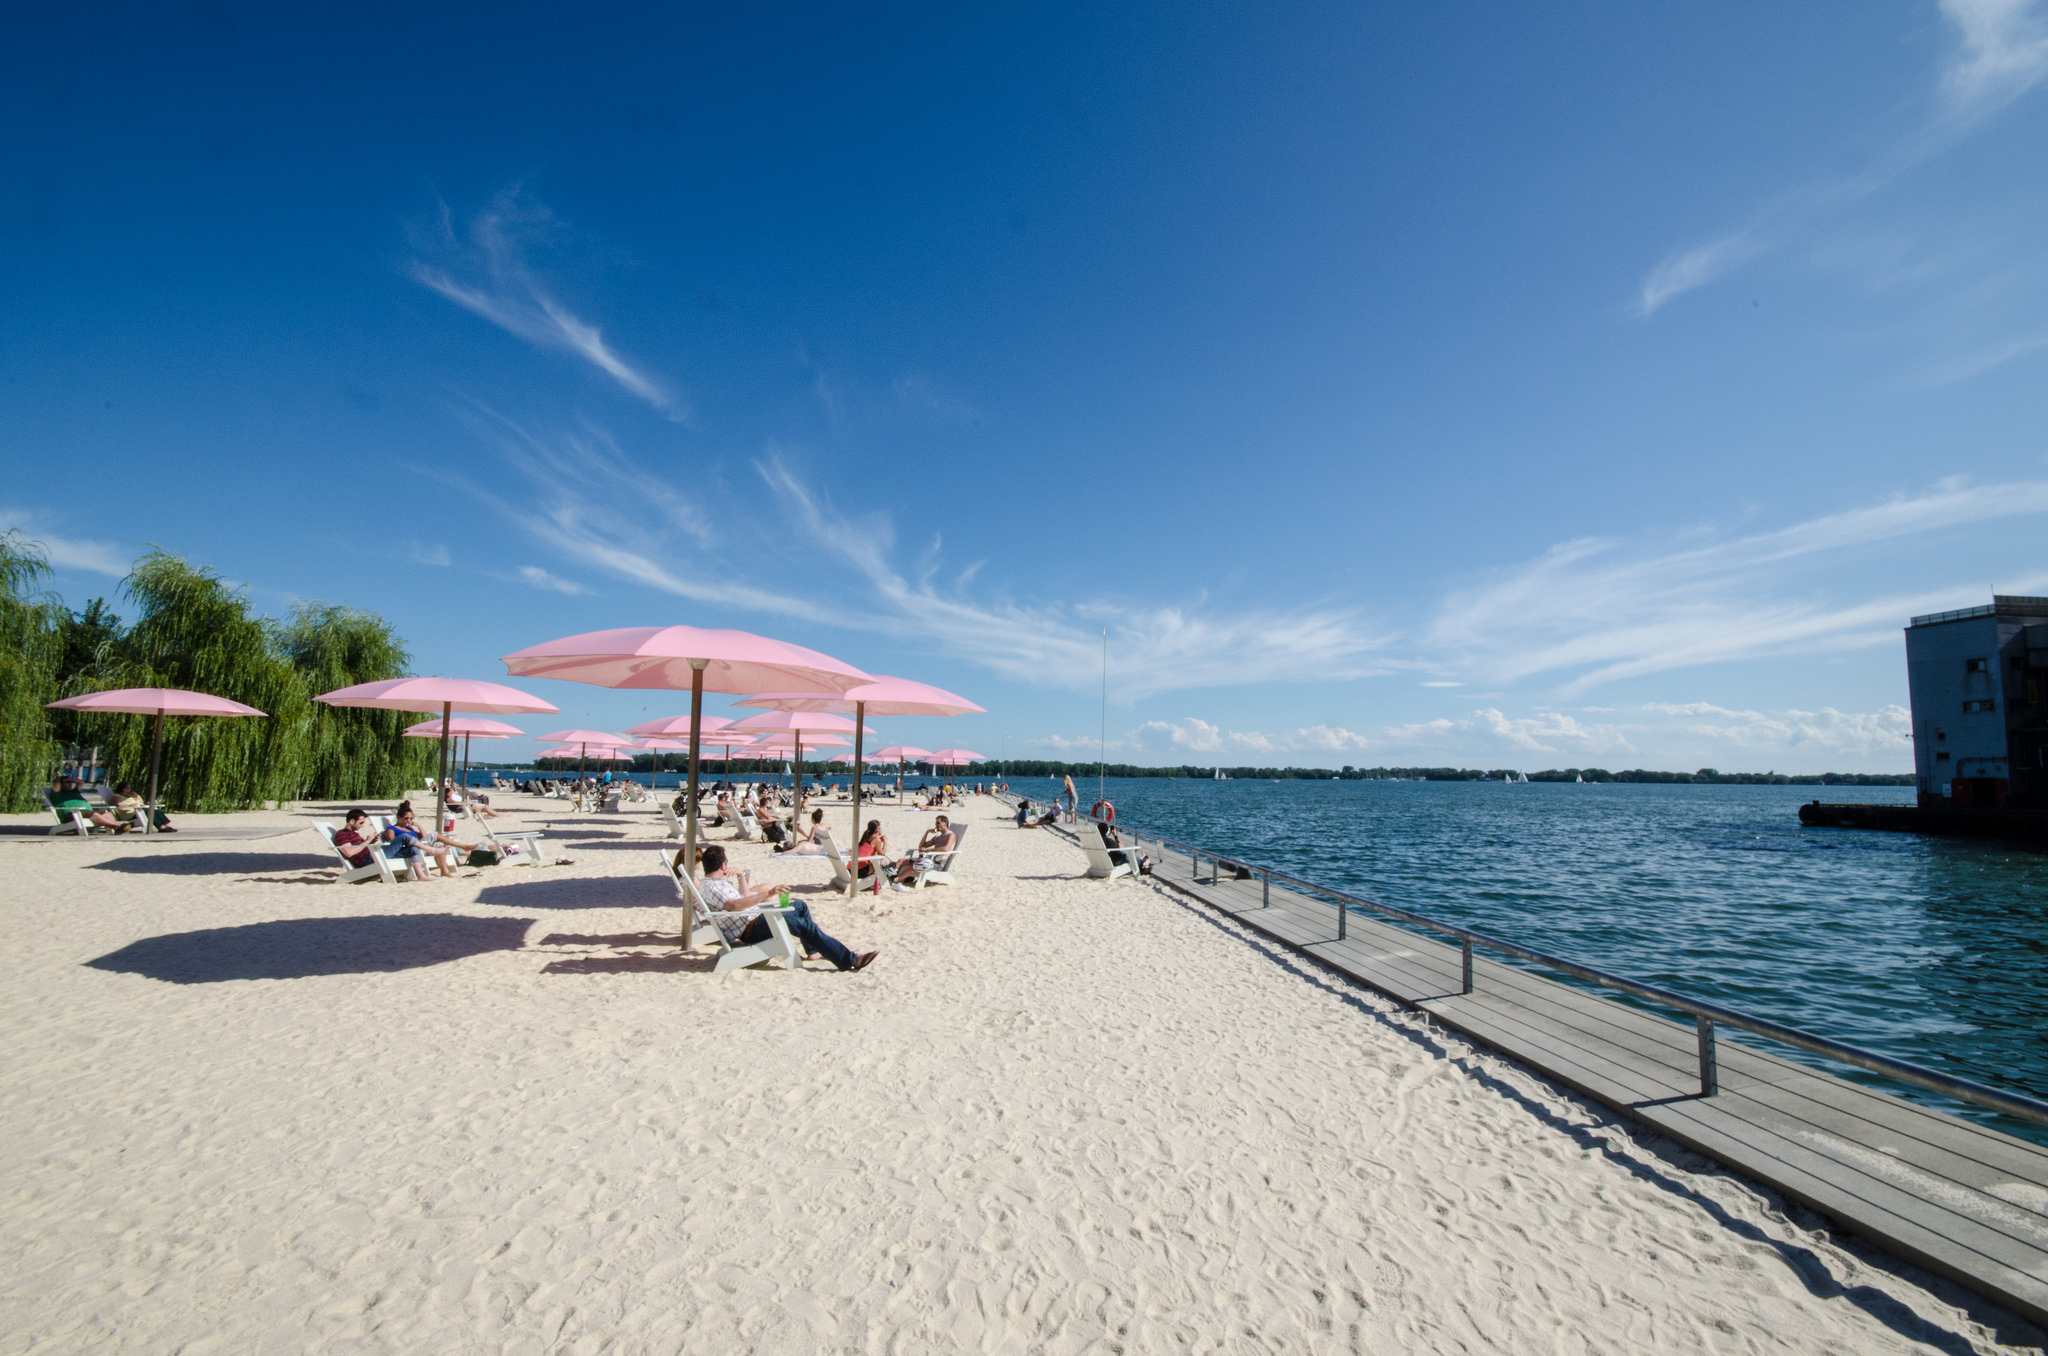 Photo of Sugar Beach in Toronto and Lakeshore. It's so bright and sunny and the water is a deep blue while the sky is a light blue.